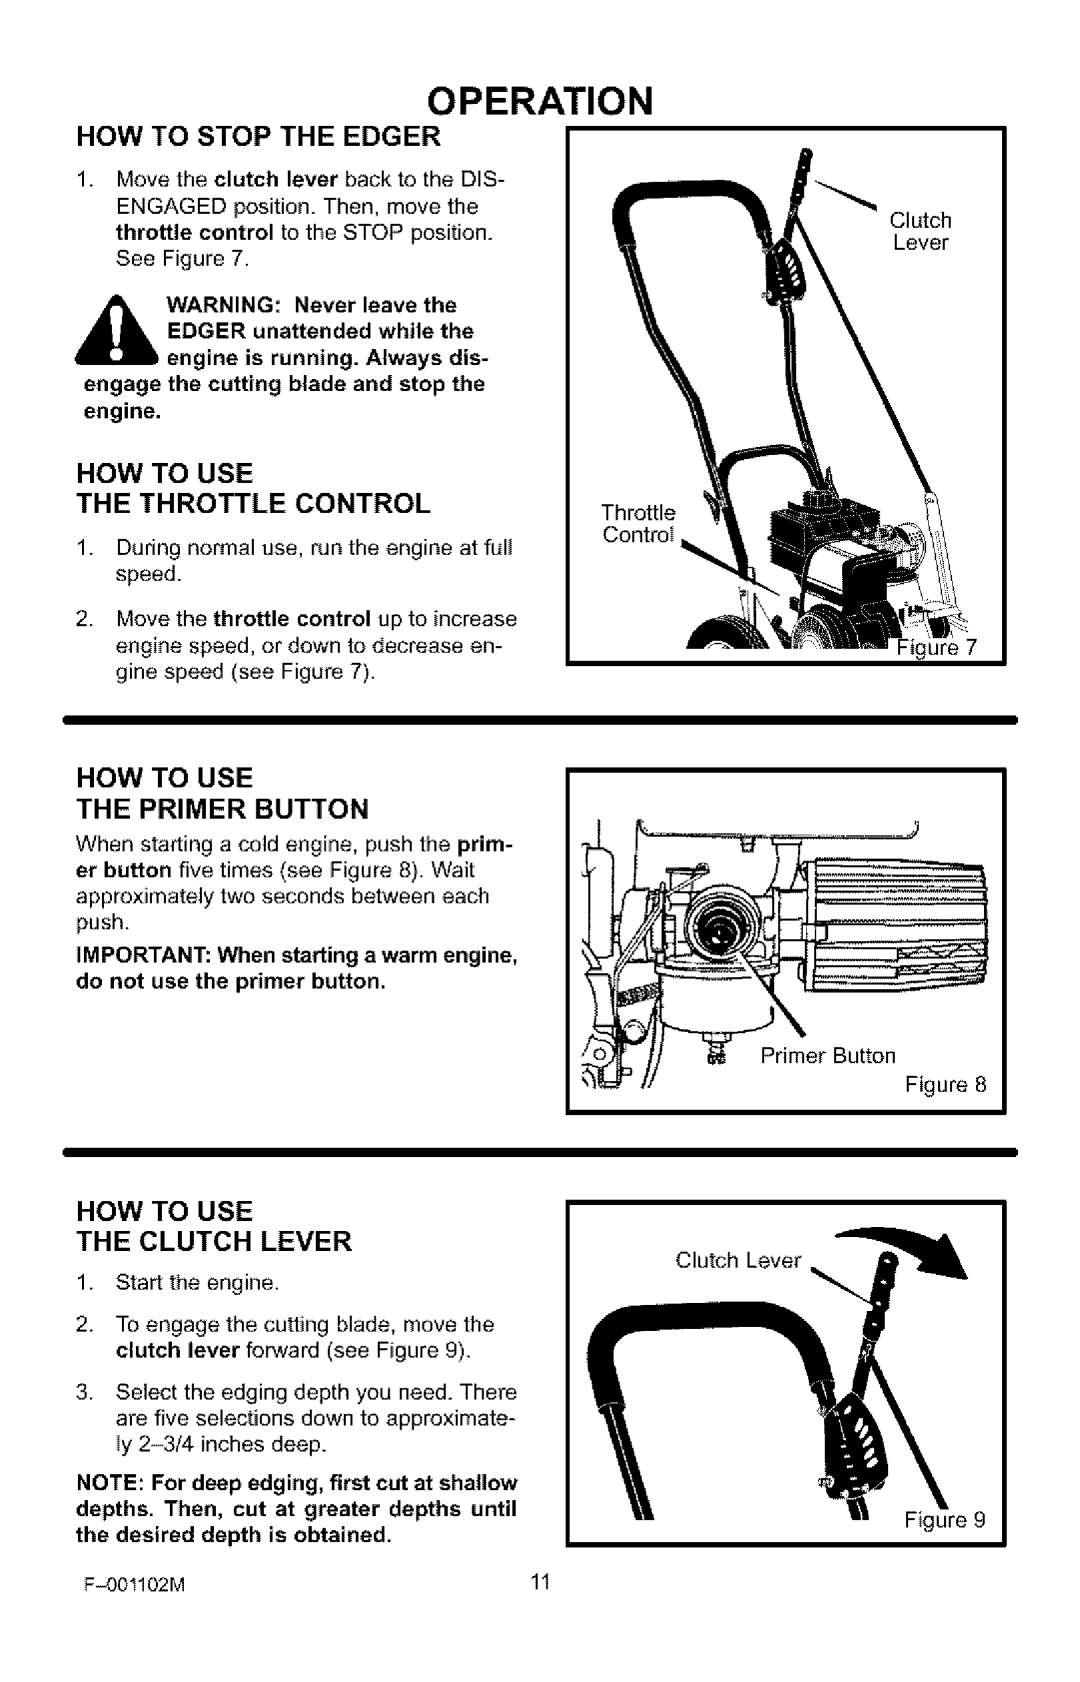 Craftsman 536.772301 manual Operation, How To Stop The Edger, How To Use, The Throttle, Control, The Primer Button, engine 